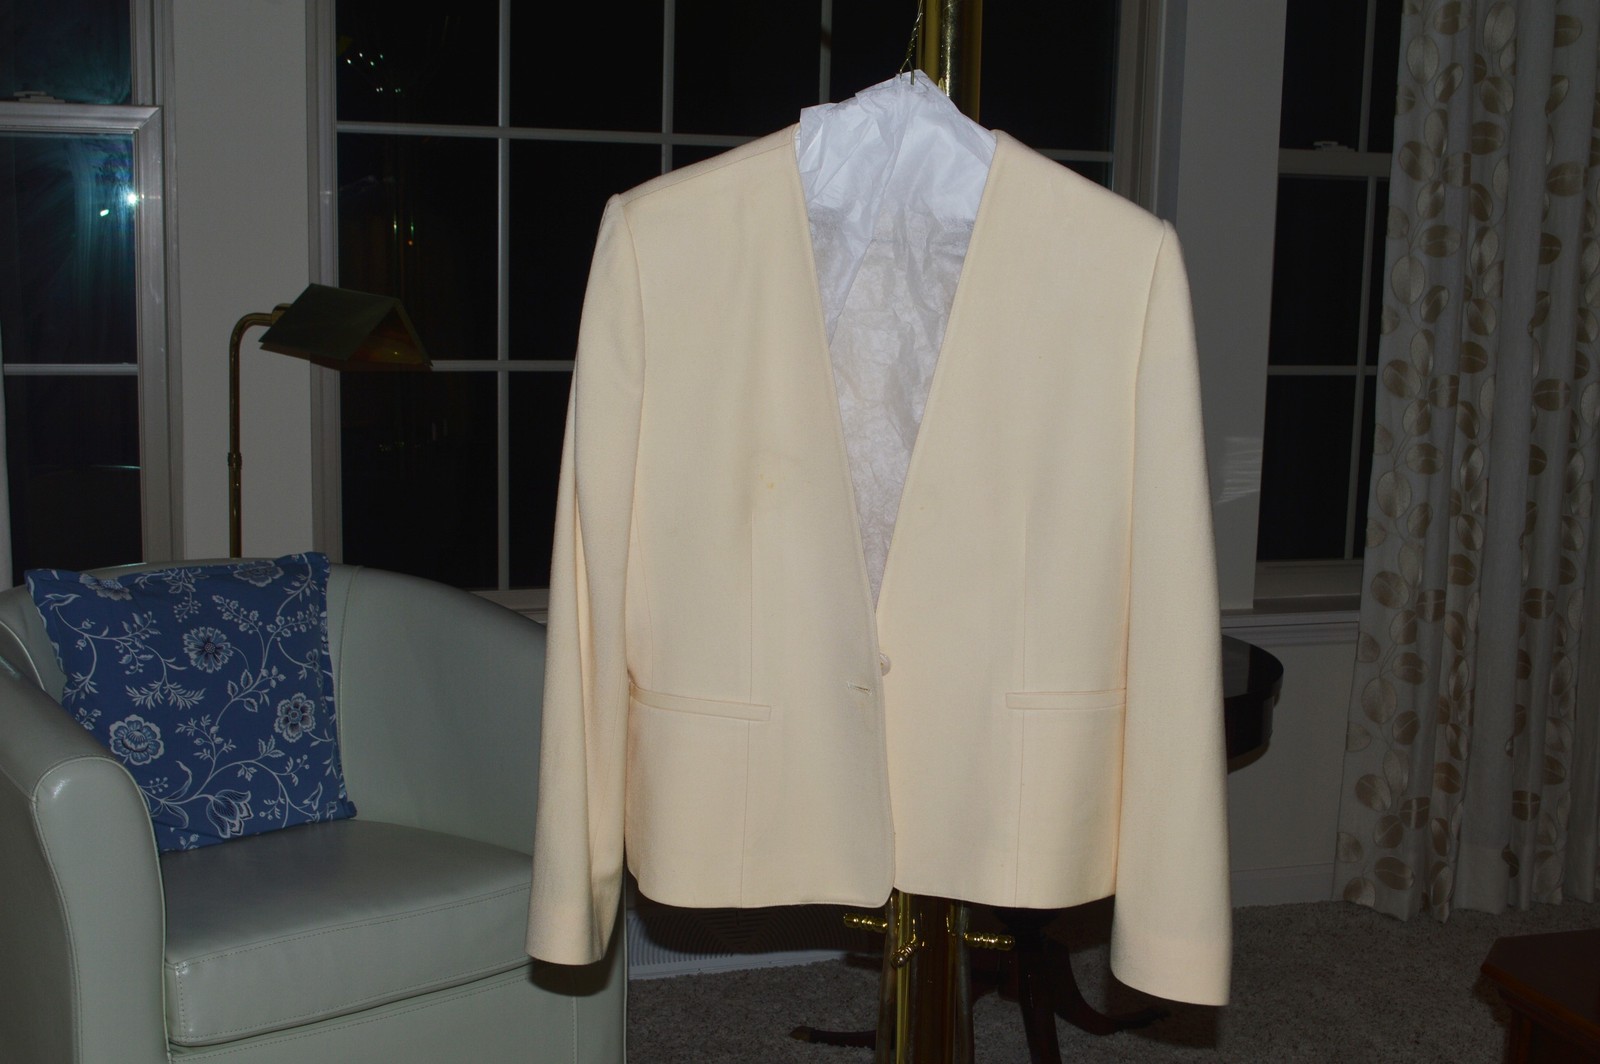 Primary image for Evan Picone Wool Blend Suit, Ivory, Pre-owned Very Good Condition, Size 12